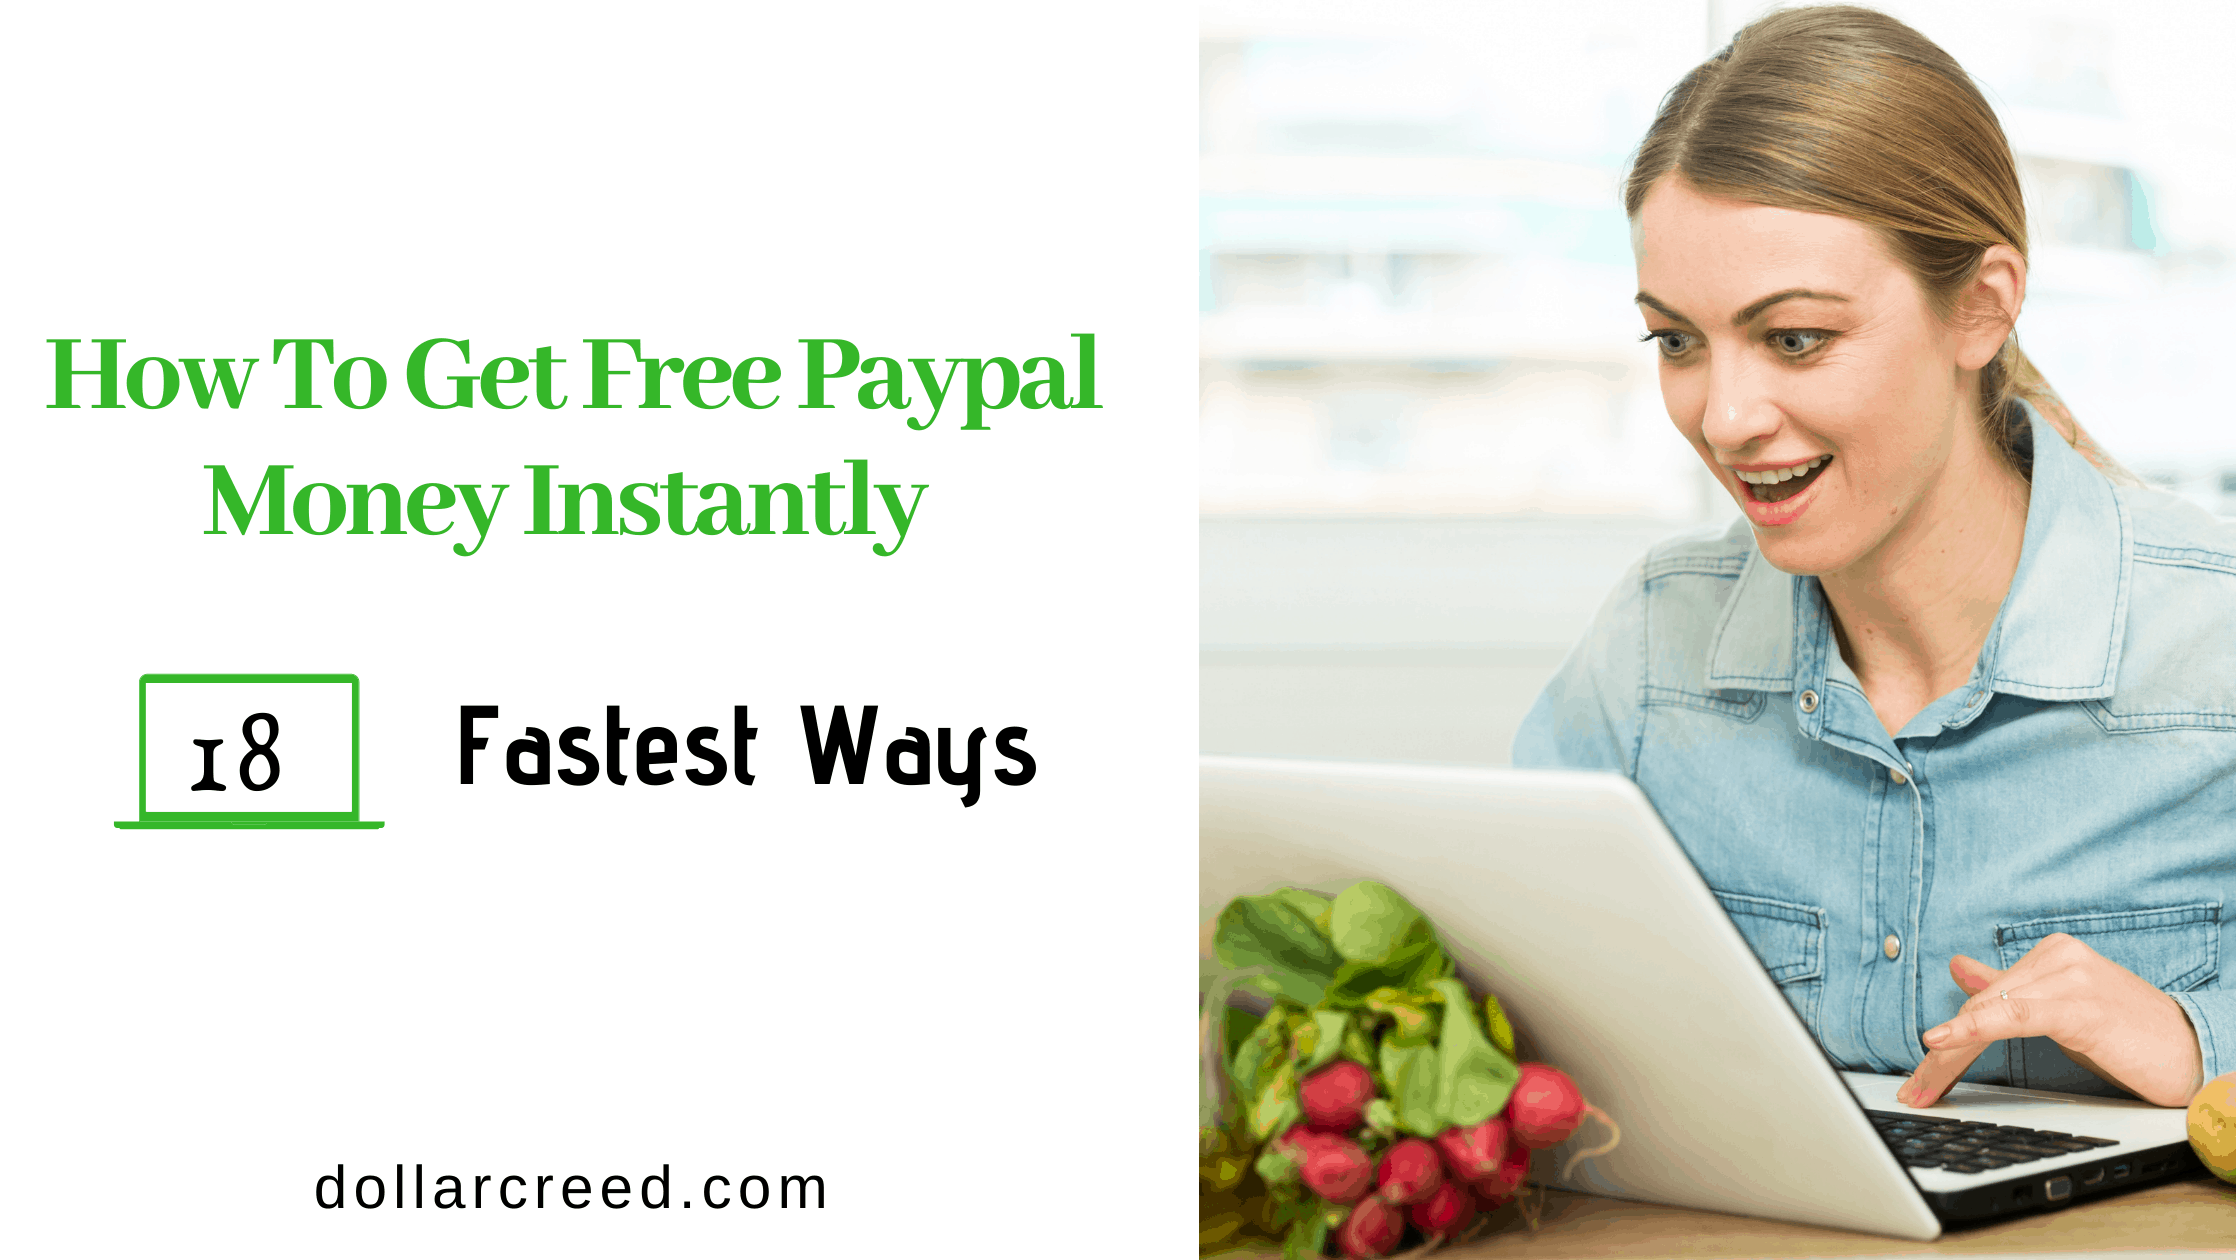 How To Get Free Paypal Money Instantly (18 Fastest Ways) DollarCreed